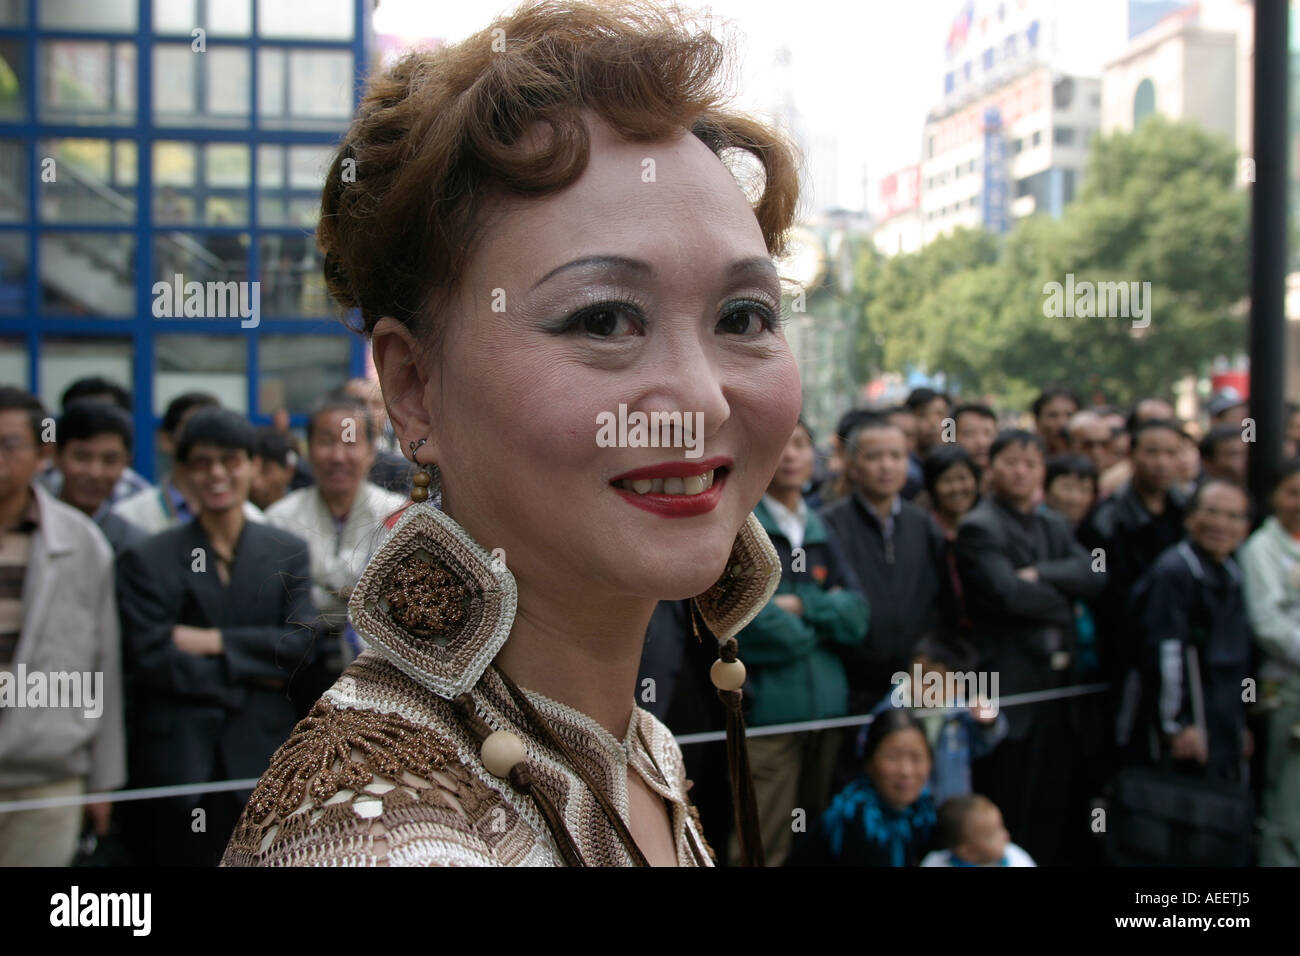 Shanghai China Amateur performer waits to take part in dance display on the open air stage in the Nanjing Road Stock Photo